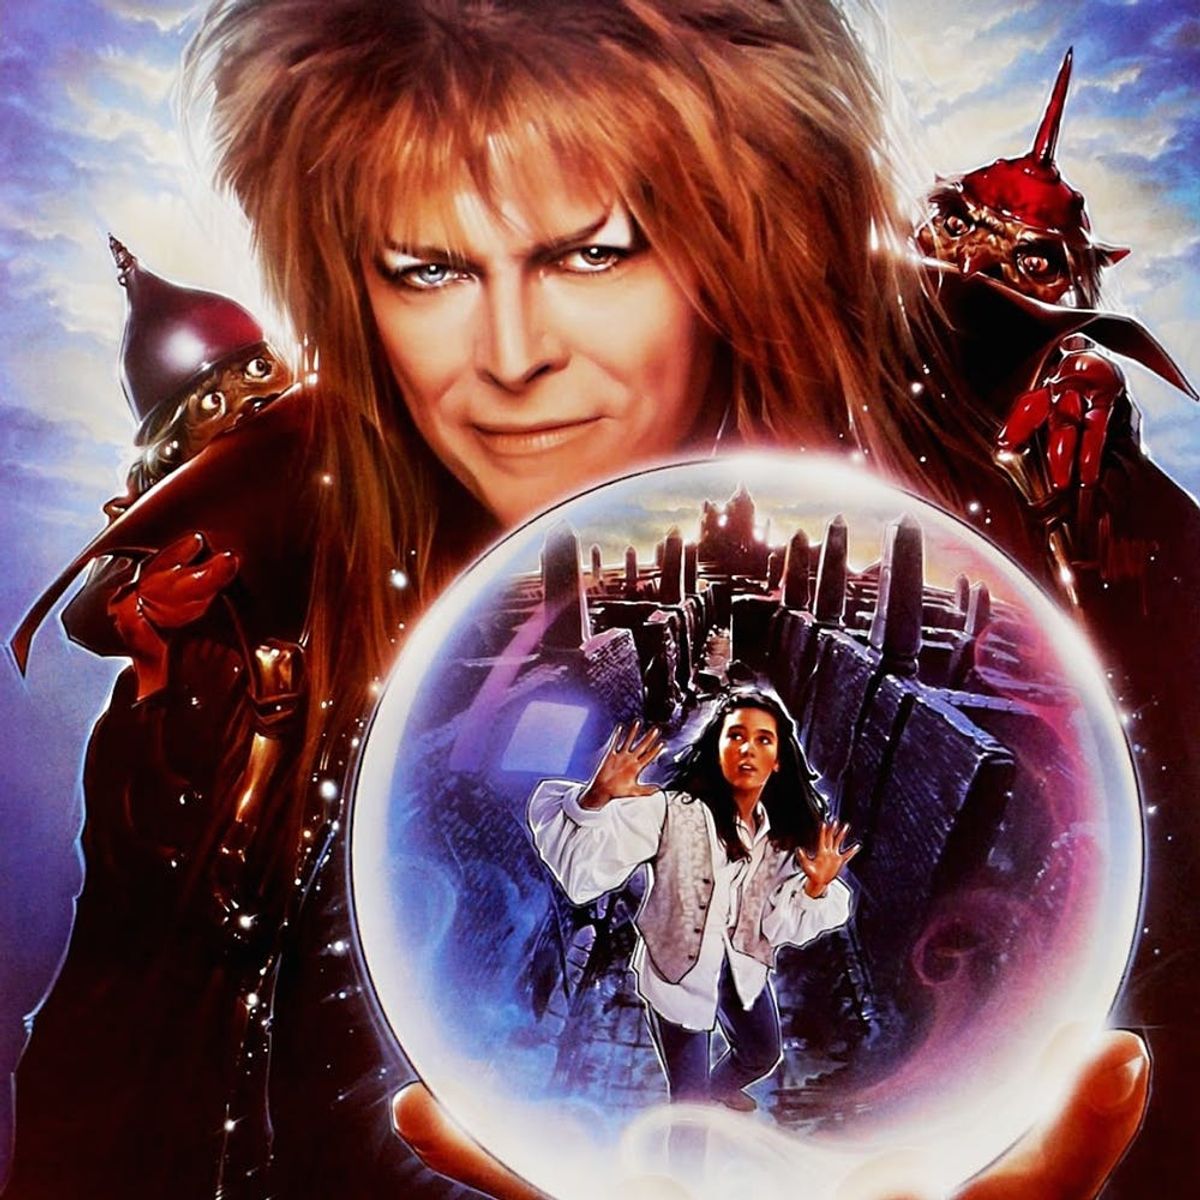 A Labyrinth Sequel Is Officially in the Works and Fans Are… Skeptical